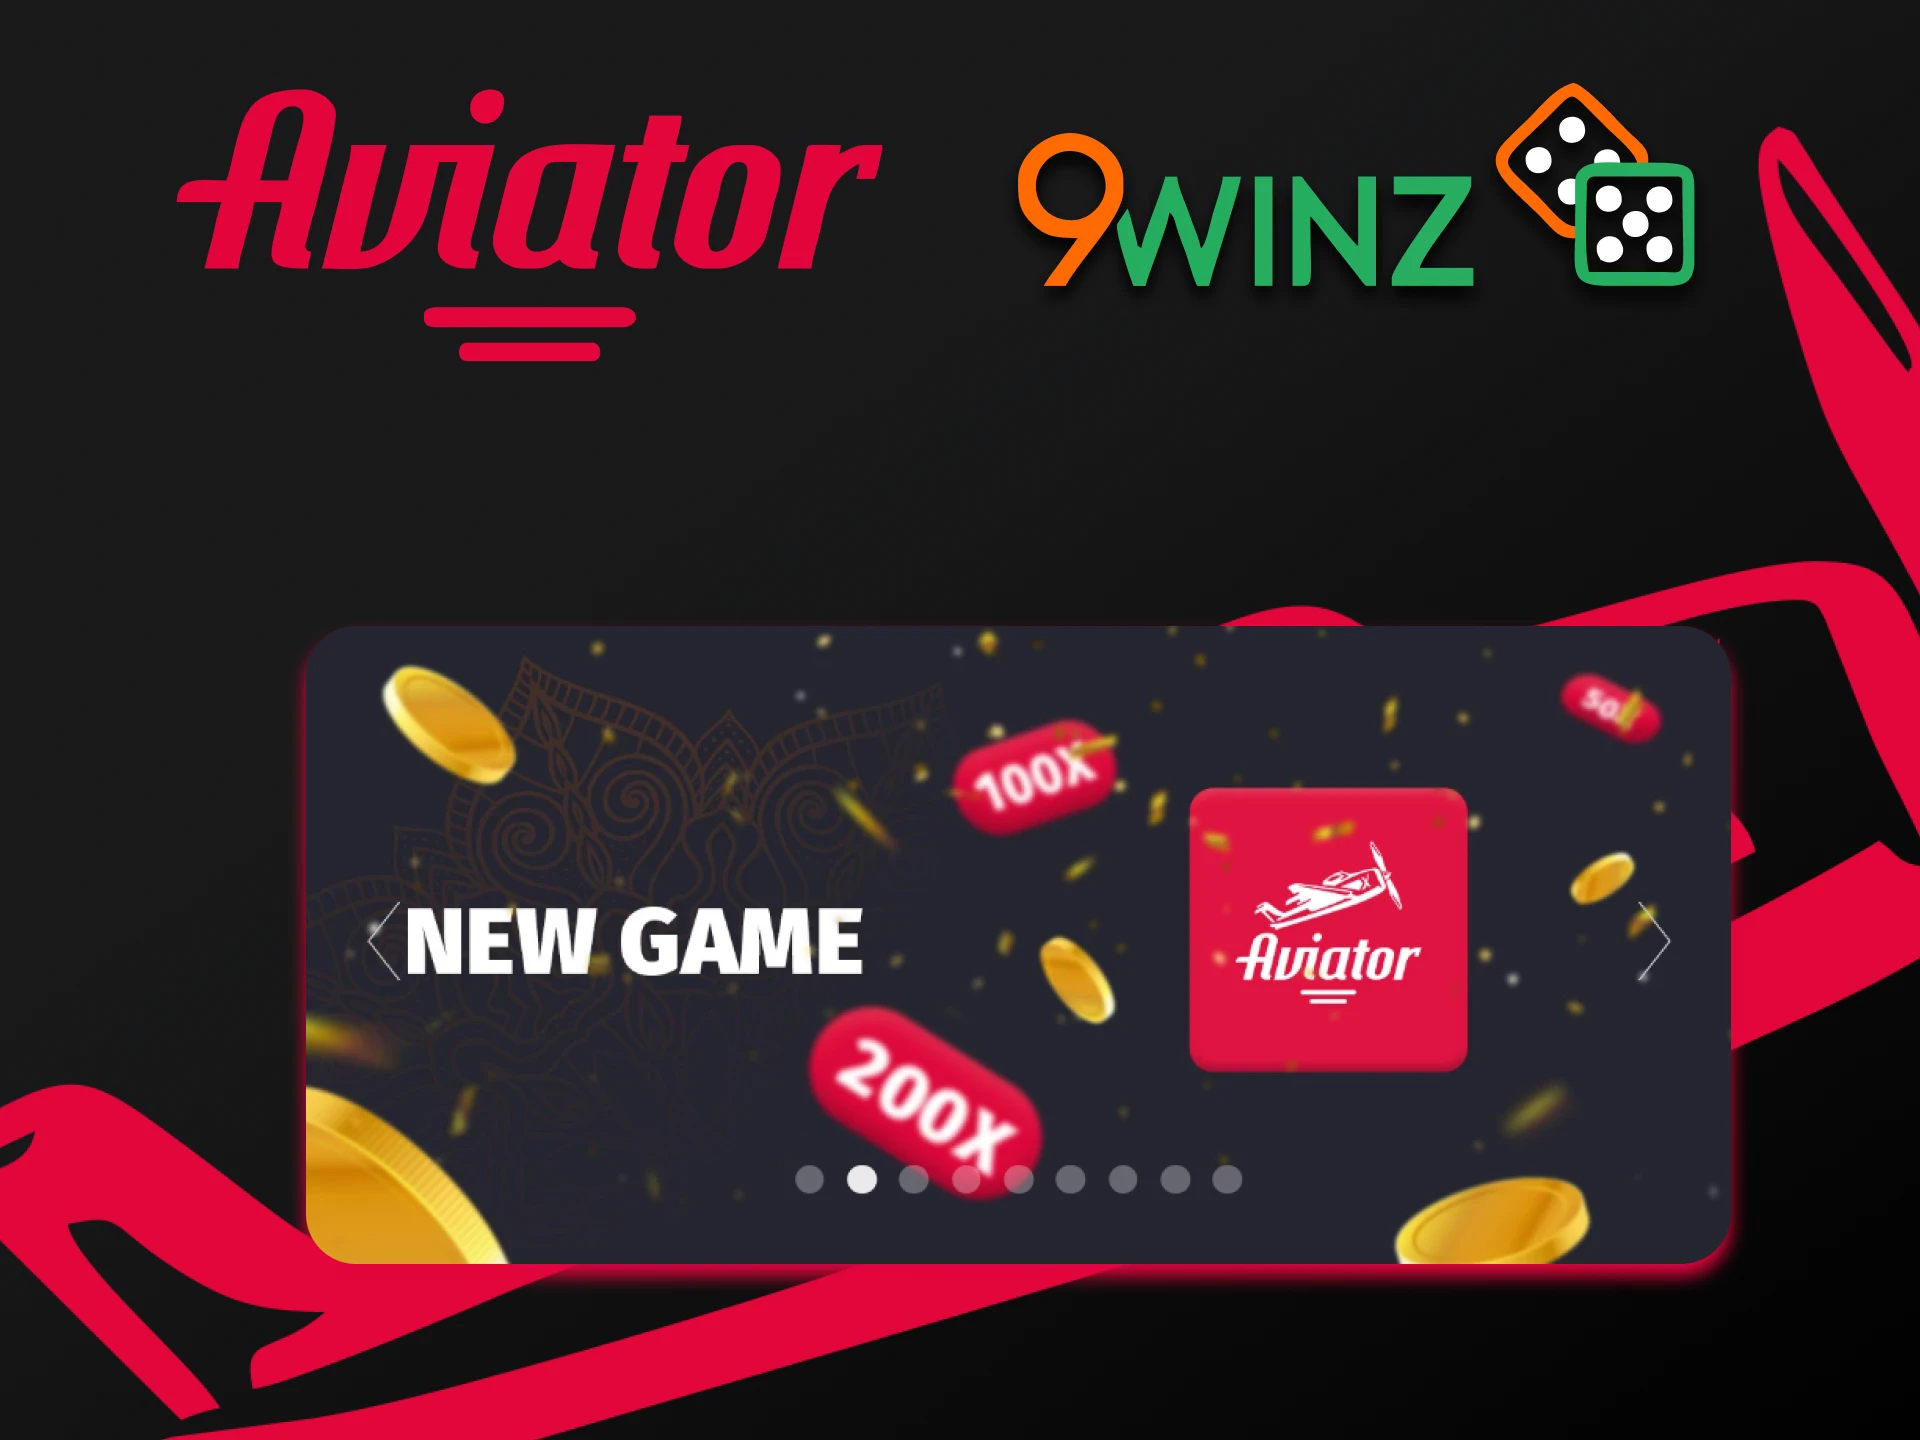 Learn all about Aviator at 9winz.